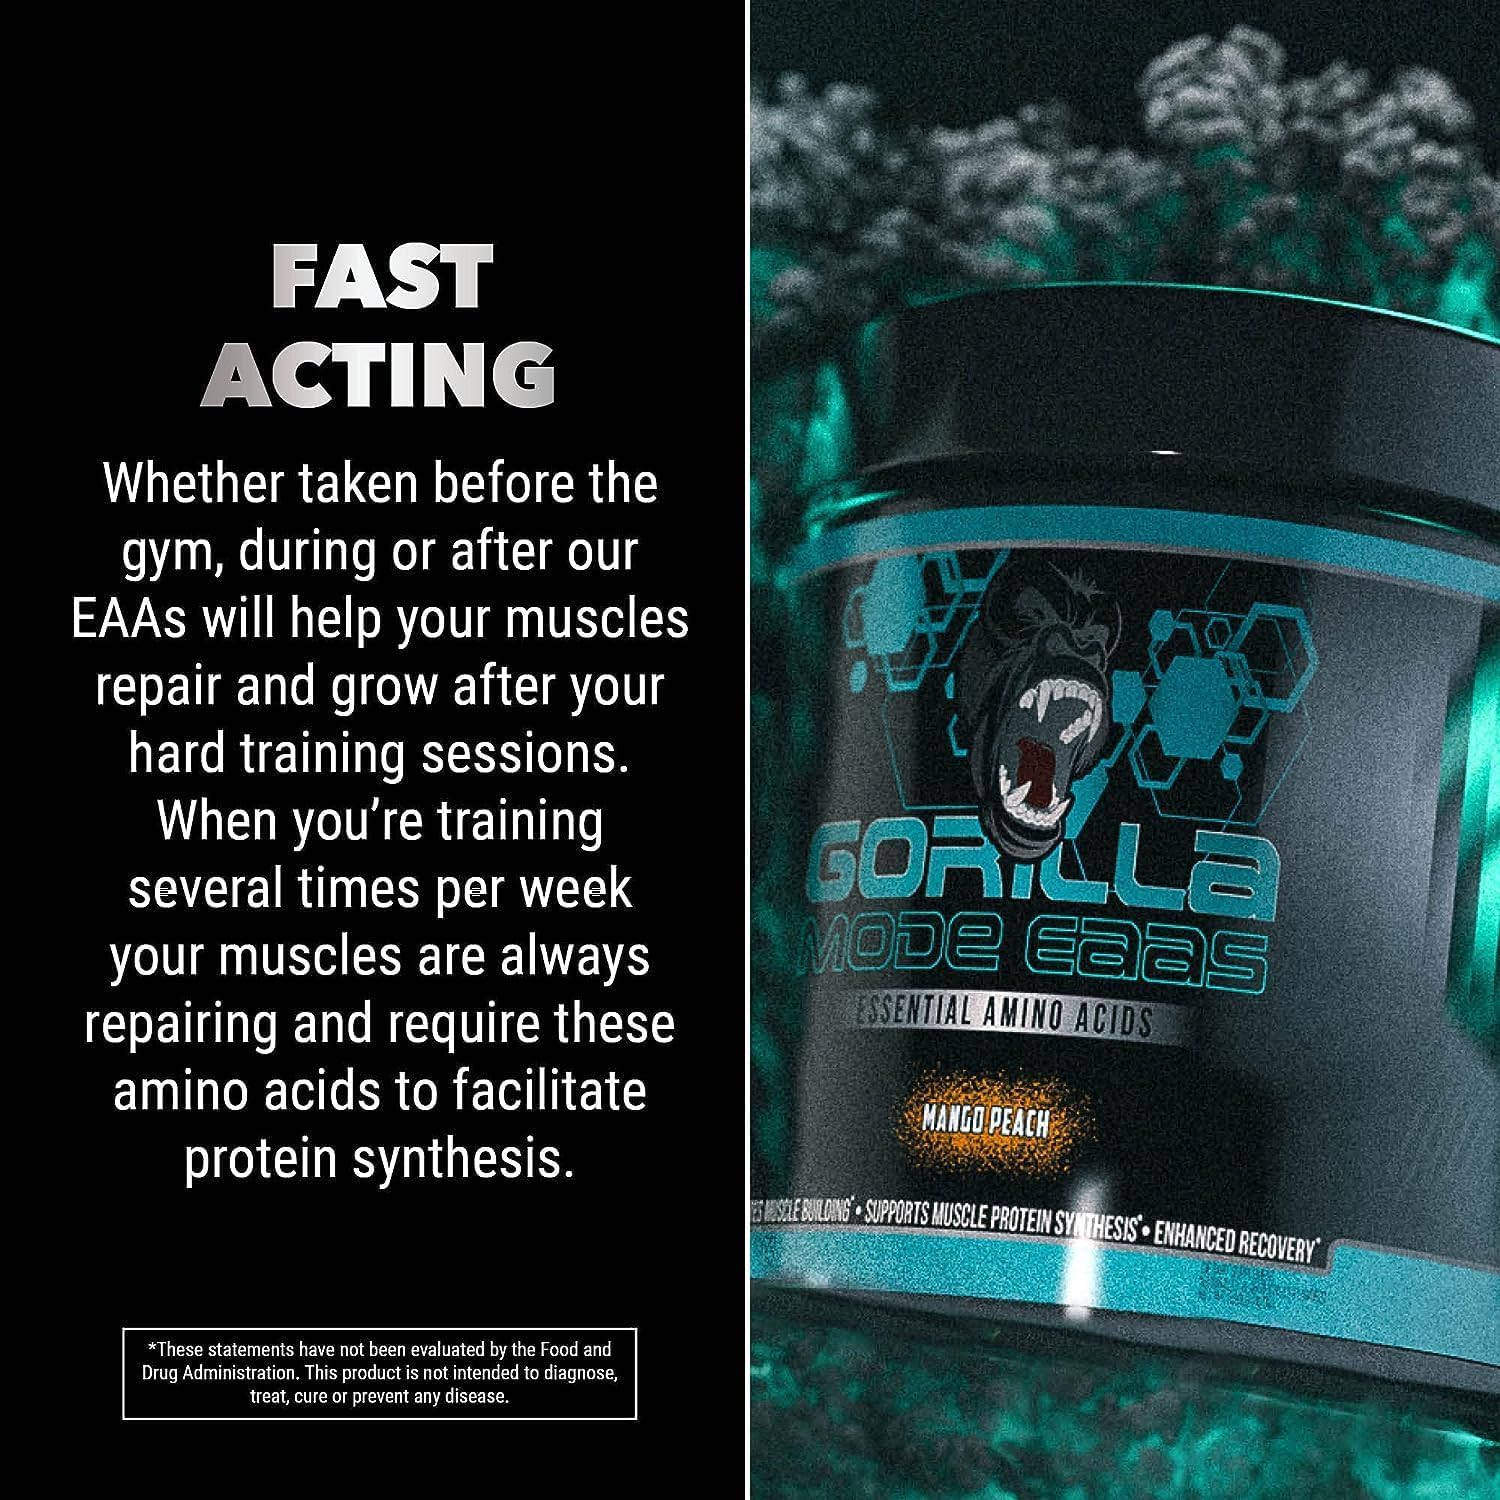 Gorilla Mode EAAs - Essential Amino Acids to Support Muscle Building, Enhanced Recovery, and Protein Synthesis/Use Before, During, or After Your Workout / 492 Grams (Cherry Blackout)